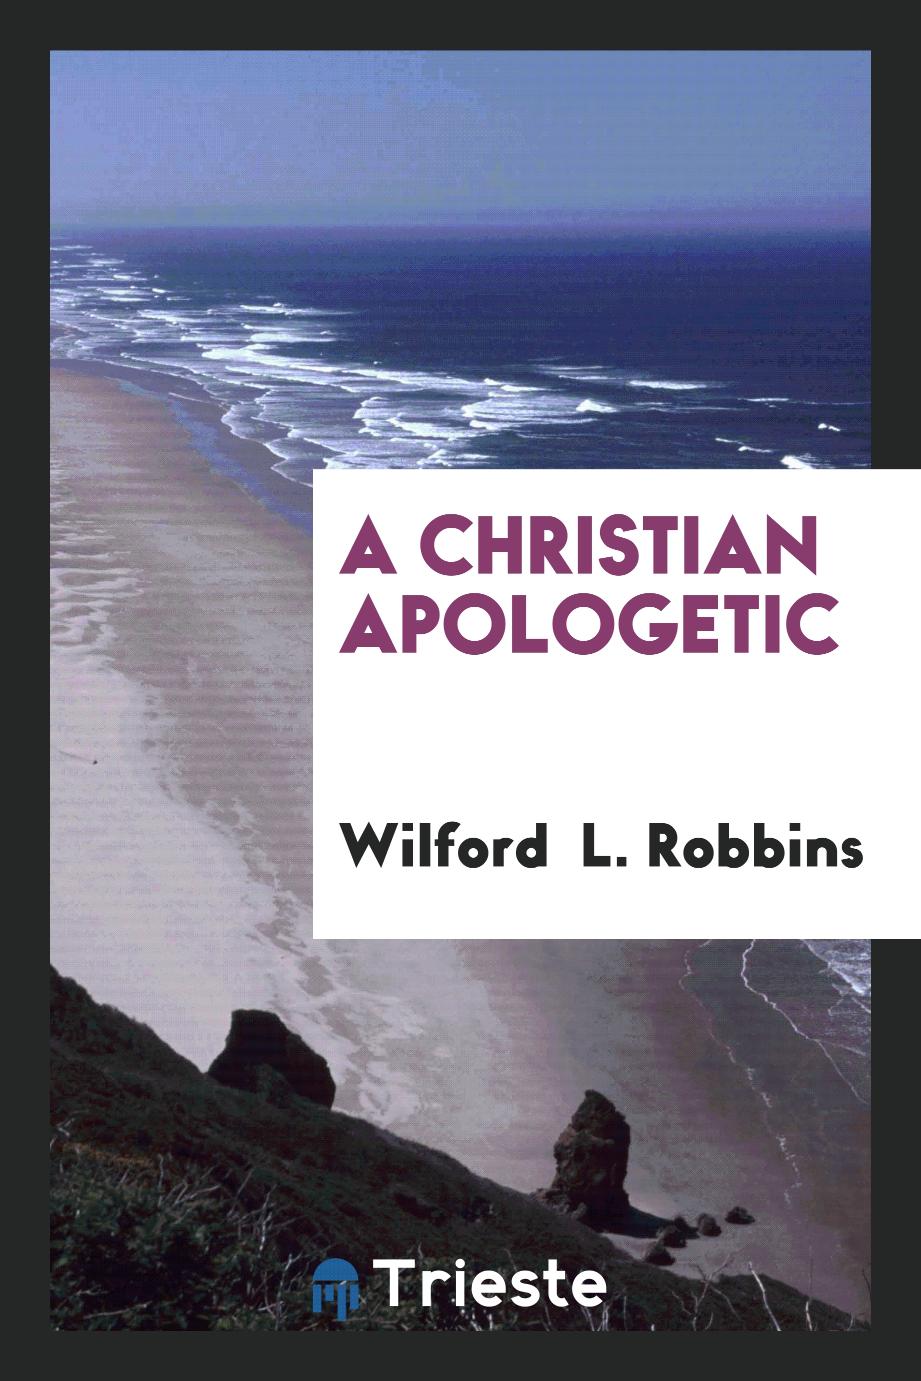 A Christian apologetic